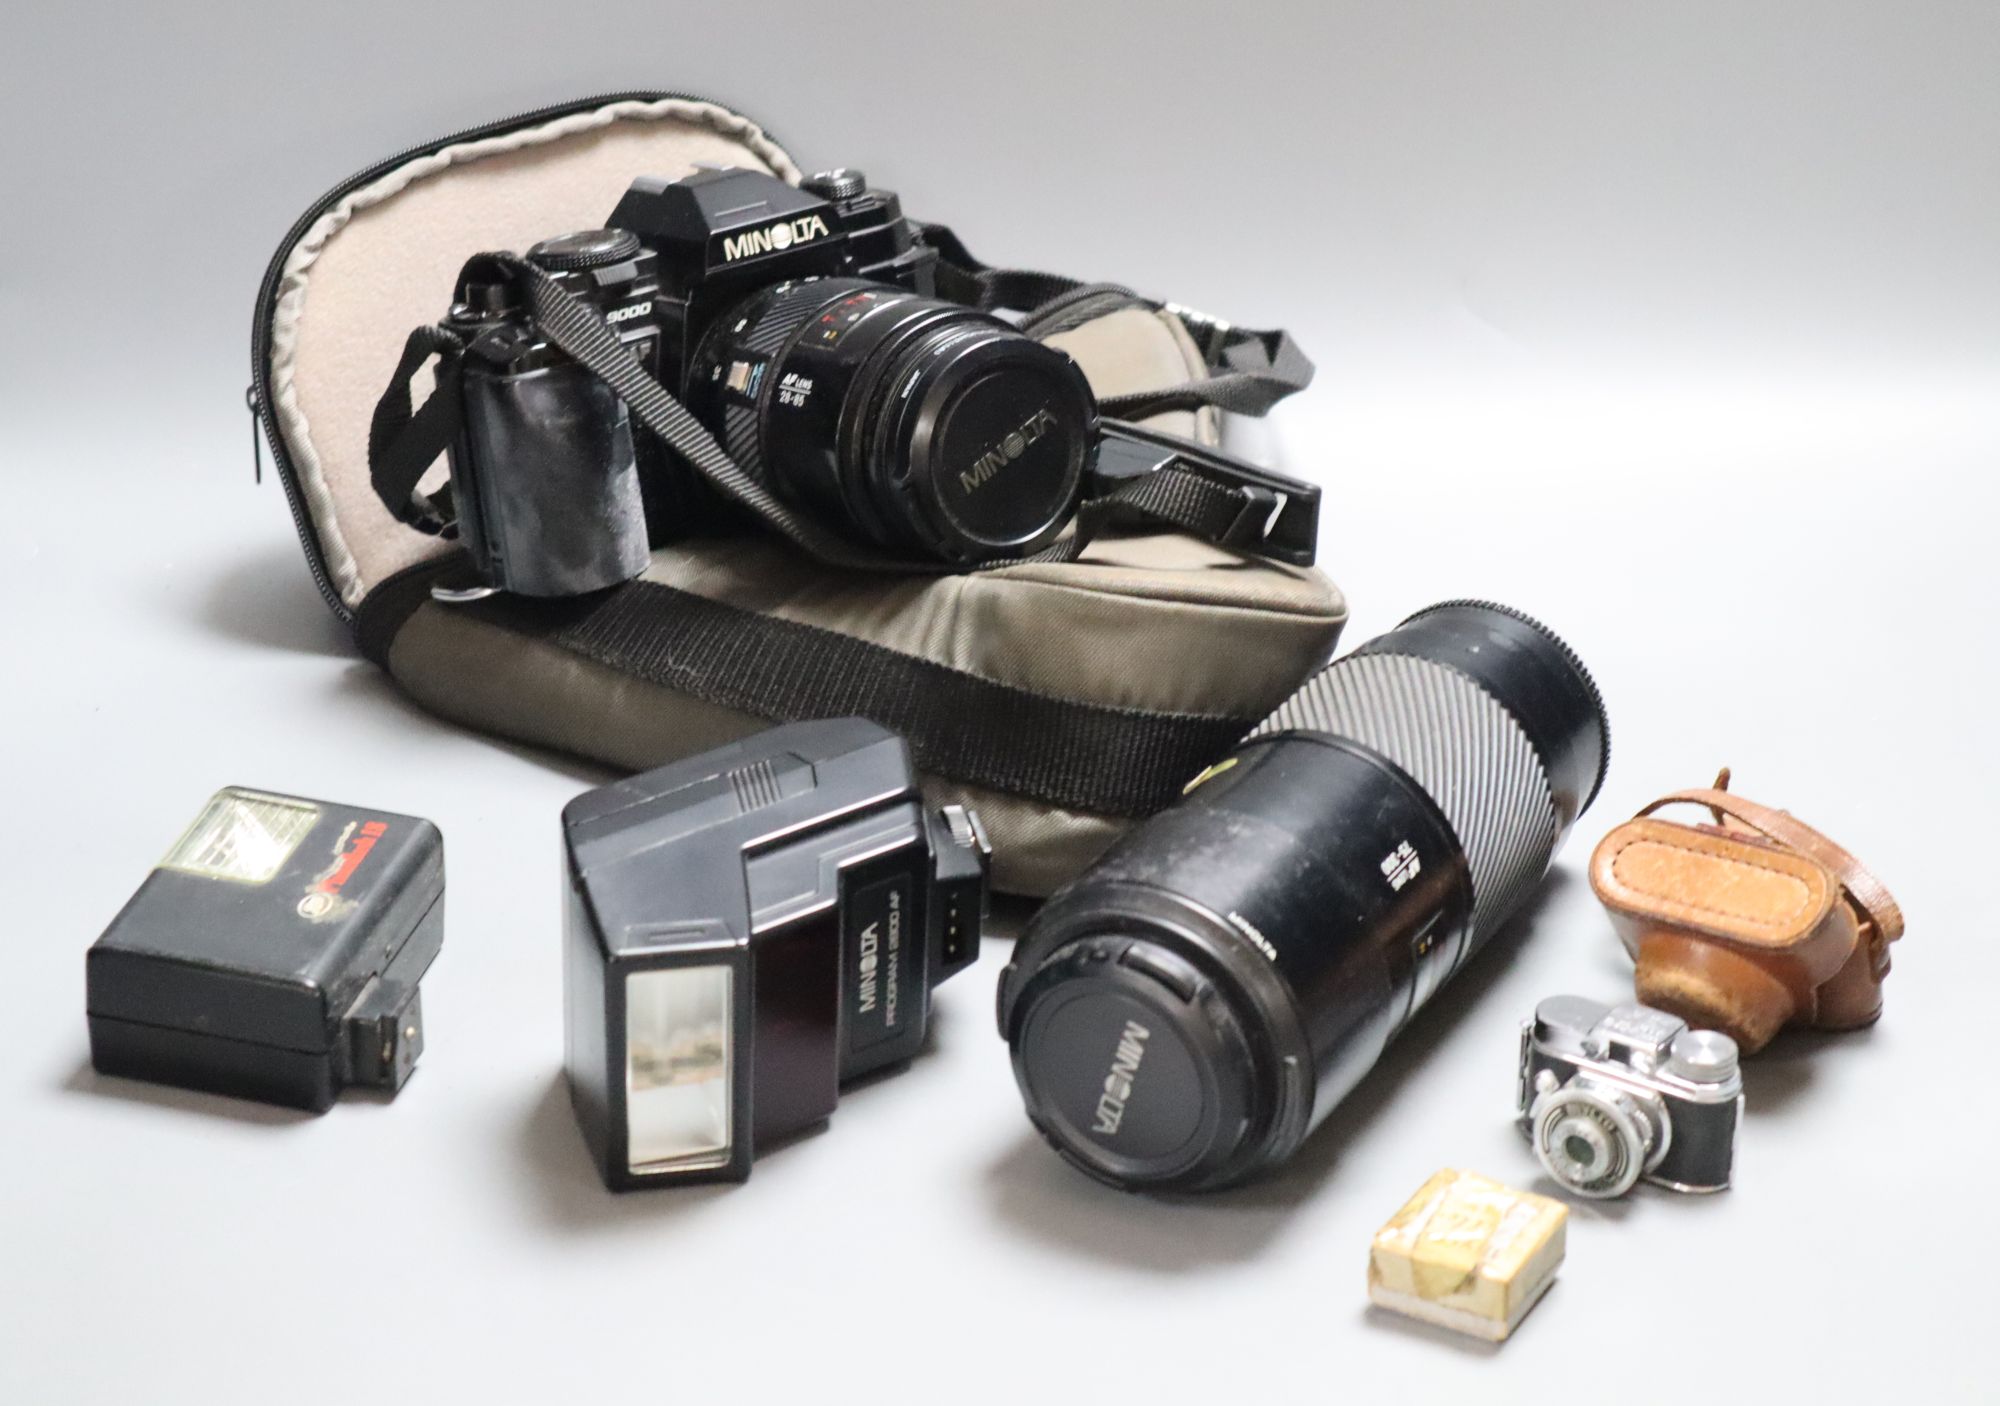 A Minolta 9000 SRL camera, a Minolta 75-300 zoom lens, with flash, together with a Sanwa Mycro miniature camera, with leather case